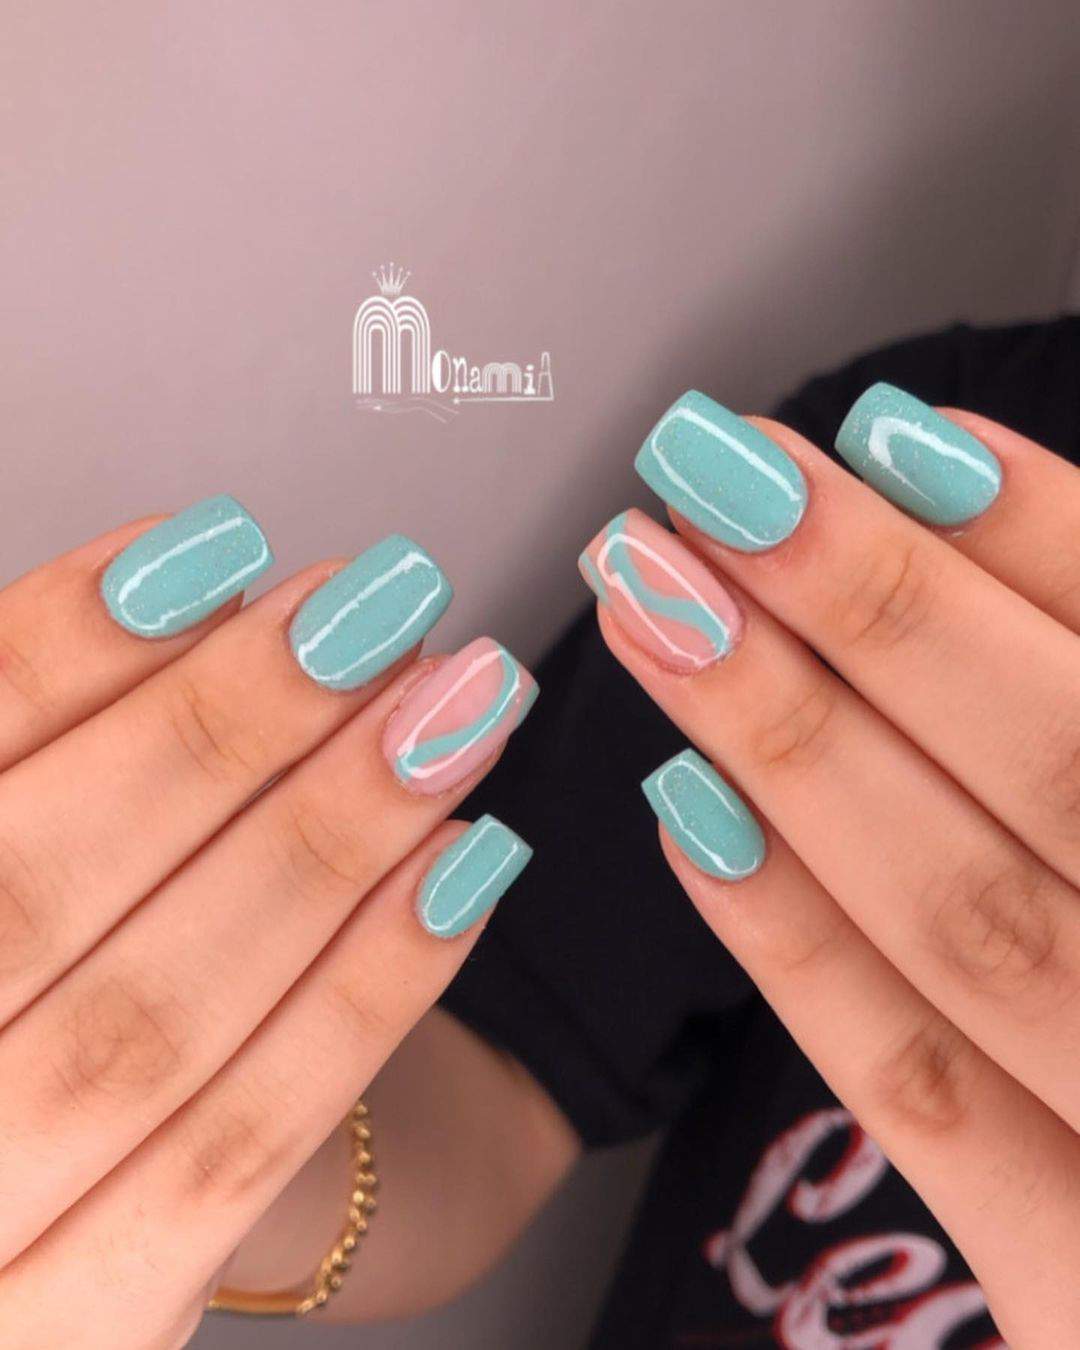 The 100+ Best Nail Designs Trends And Ideas In 2021 images 70